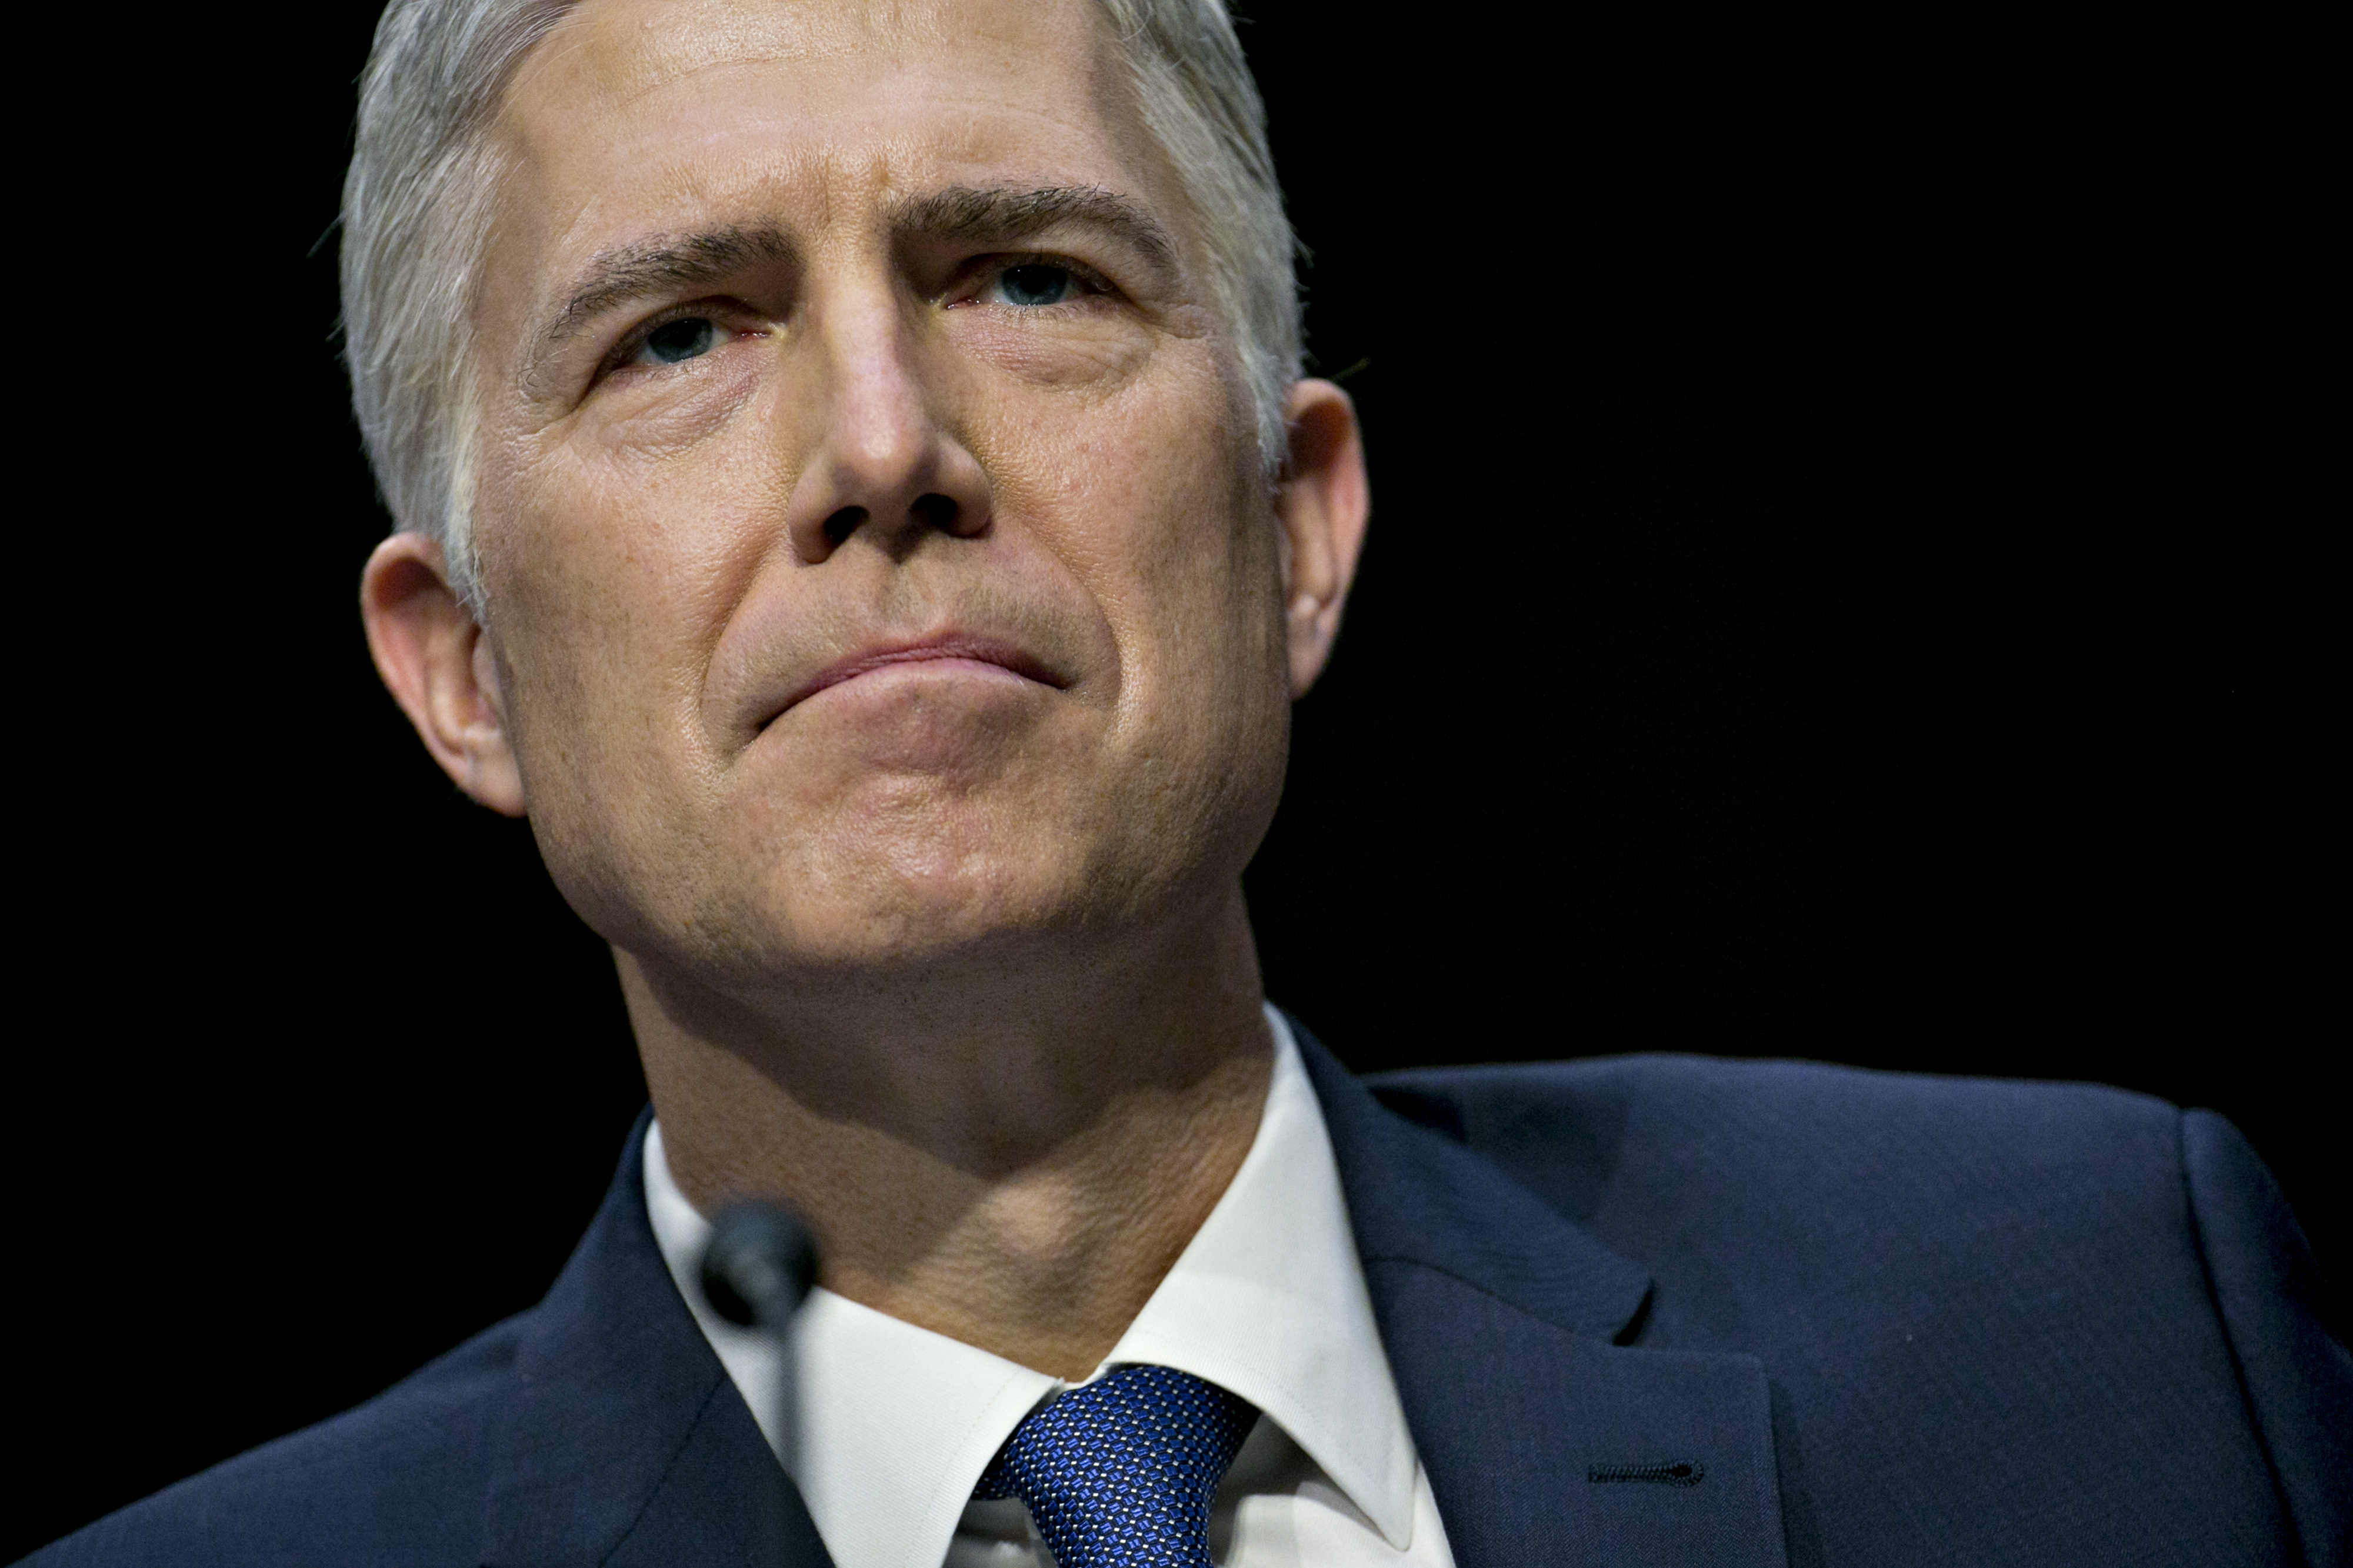 Neil Gorsuch listens during a Senate Judiciary Committee confirmation hearing in Washington, on March 20, 2017. (Andrew Harrer—Bloomberg/Getty Images)